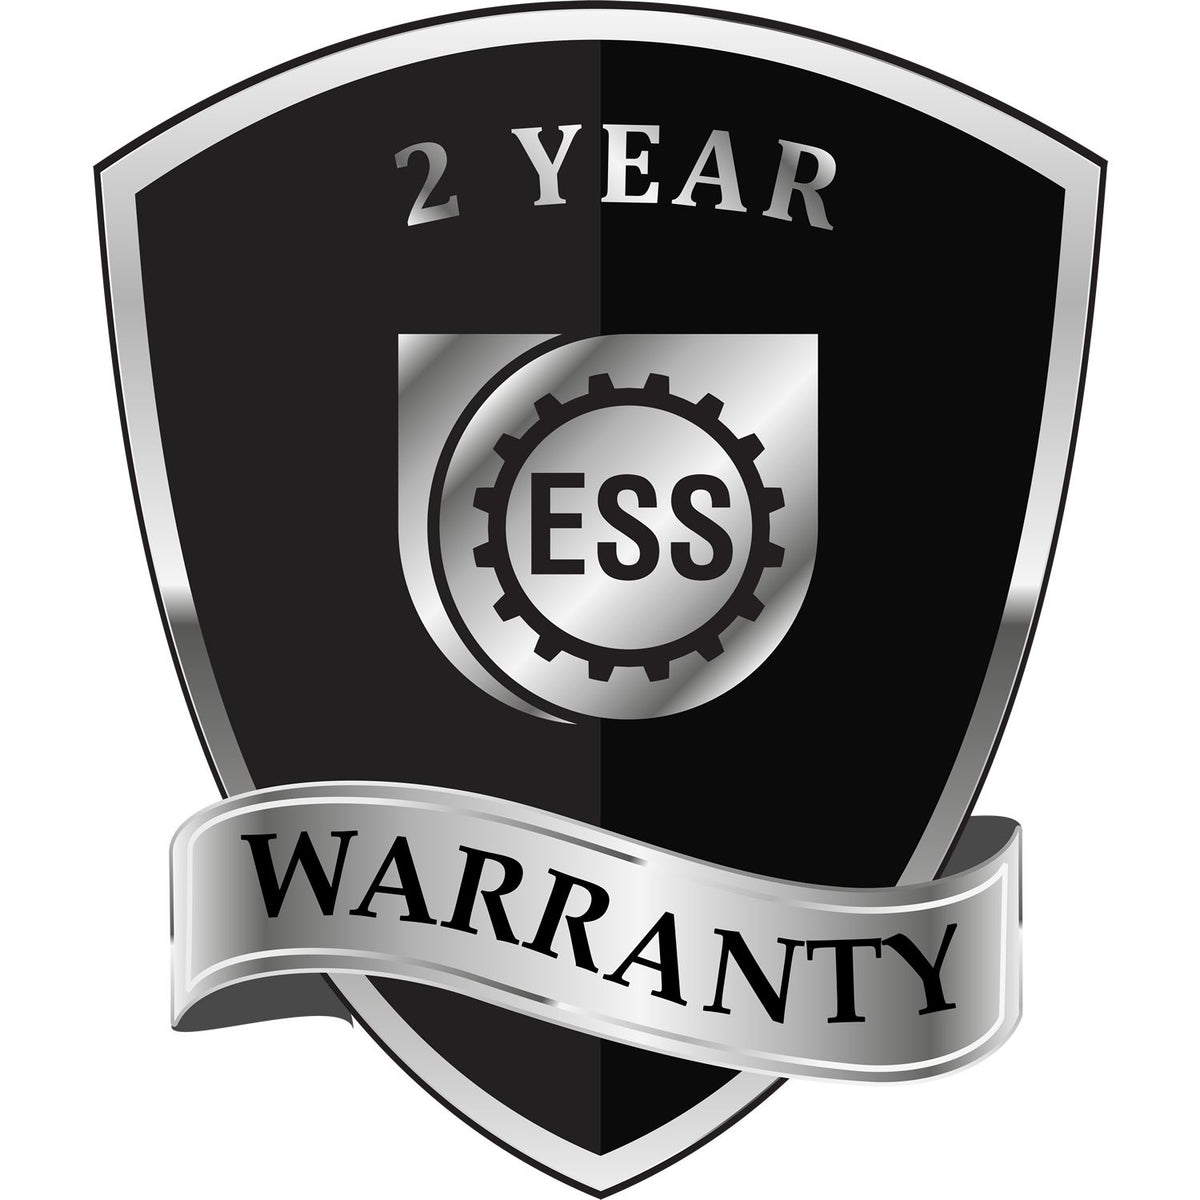 A badge or emblem showing a warranty icon for the Mississippi Desk Architect Embossing Seal